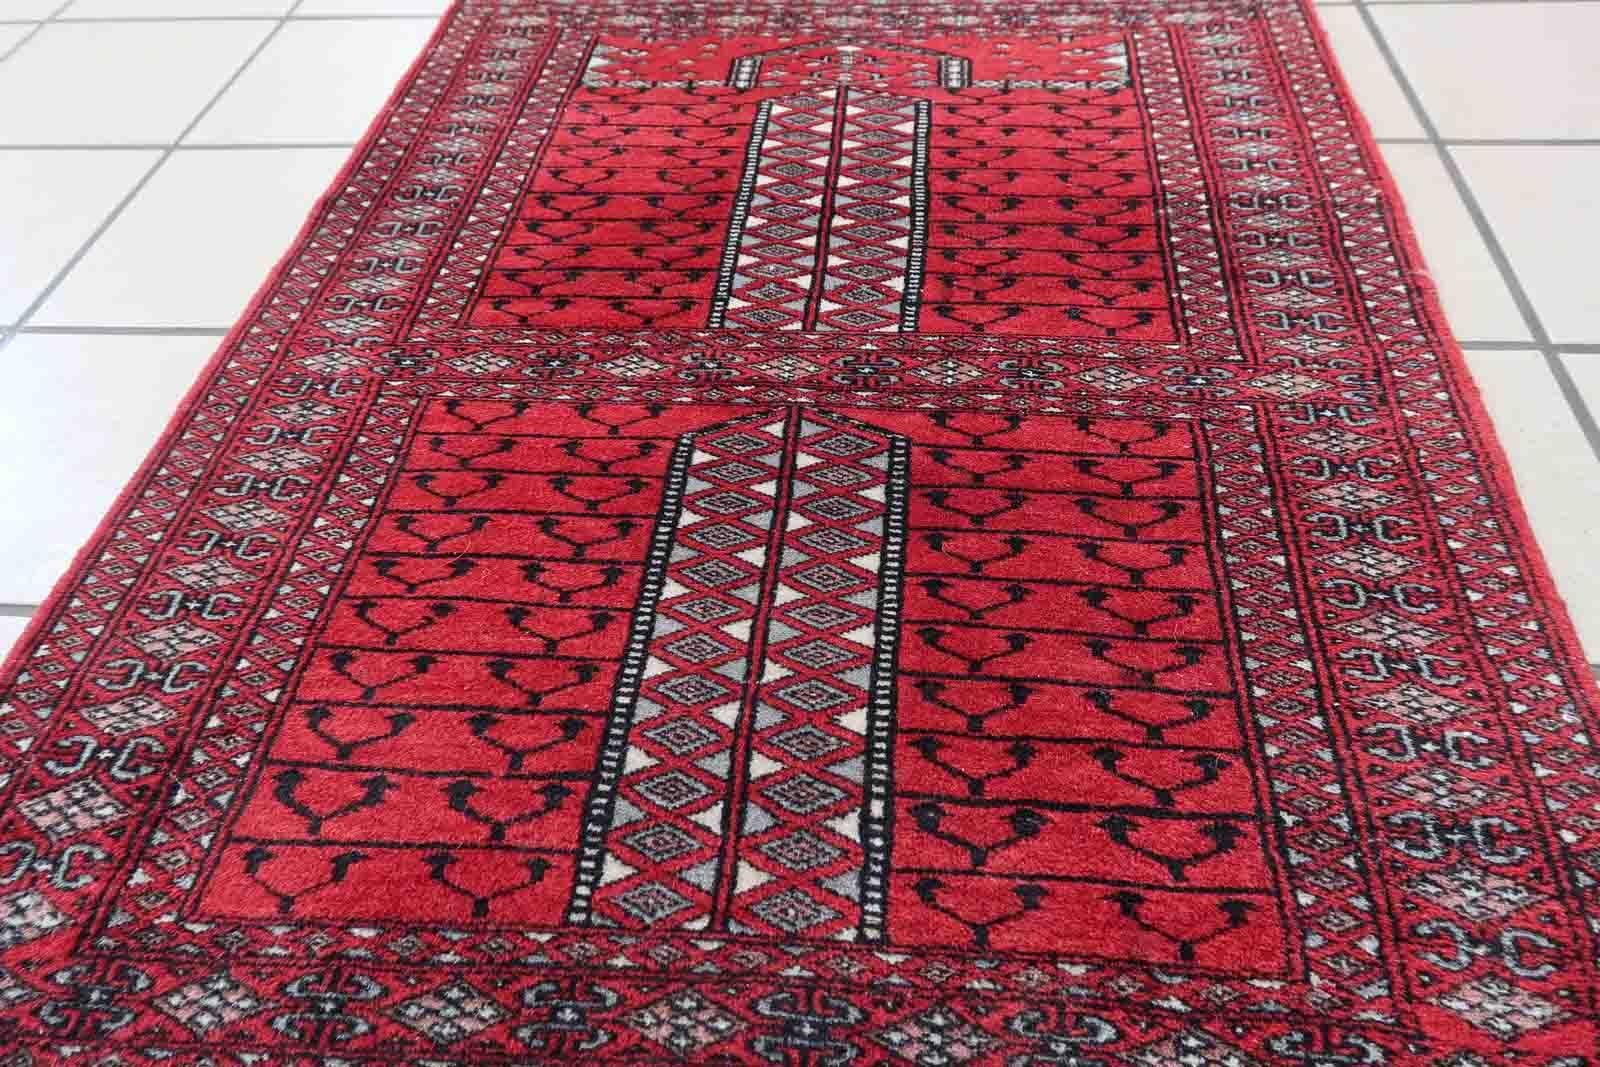 Handmade vintage red prayer rug from Pakistan in Lahore style. The rug is in original good condition, it is from the end of 20th century.

-condition: original good,

-circa: 1970s,

-size: 2' x 2.8' (64cm x 88cm),

-material: wool,

-country of